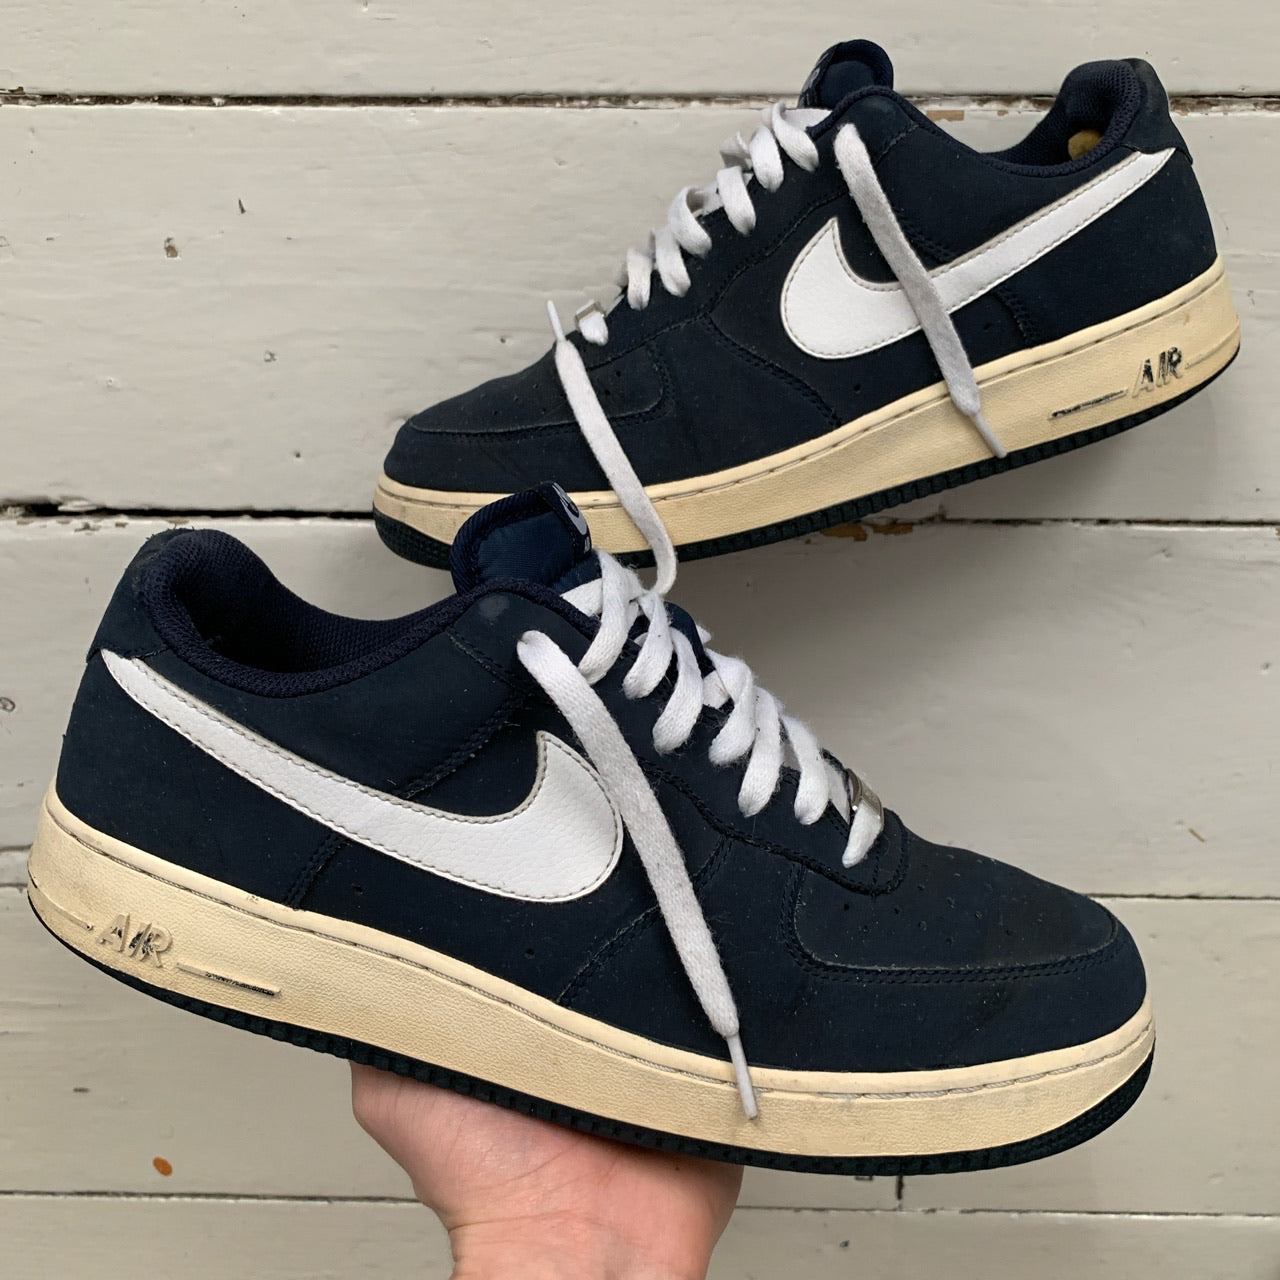 Nike Air Force 1 Navy and White (UK 10)